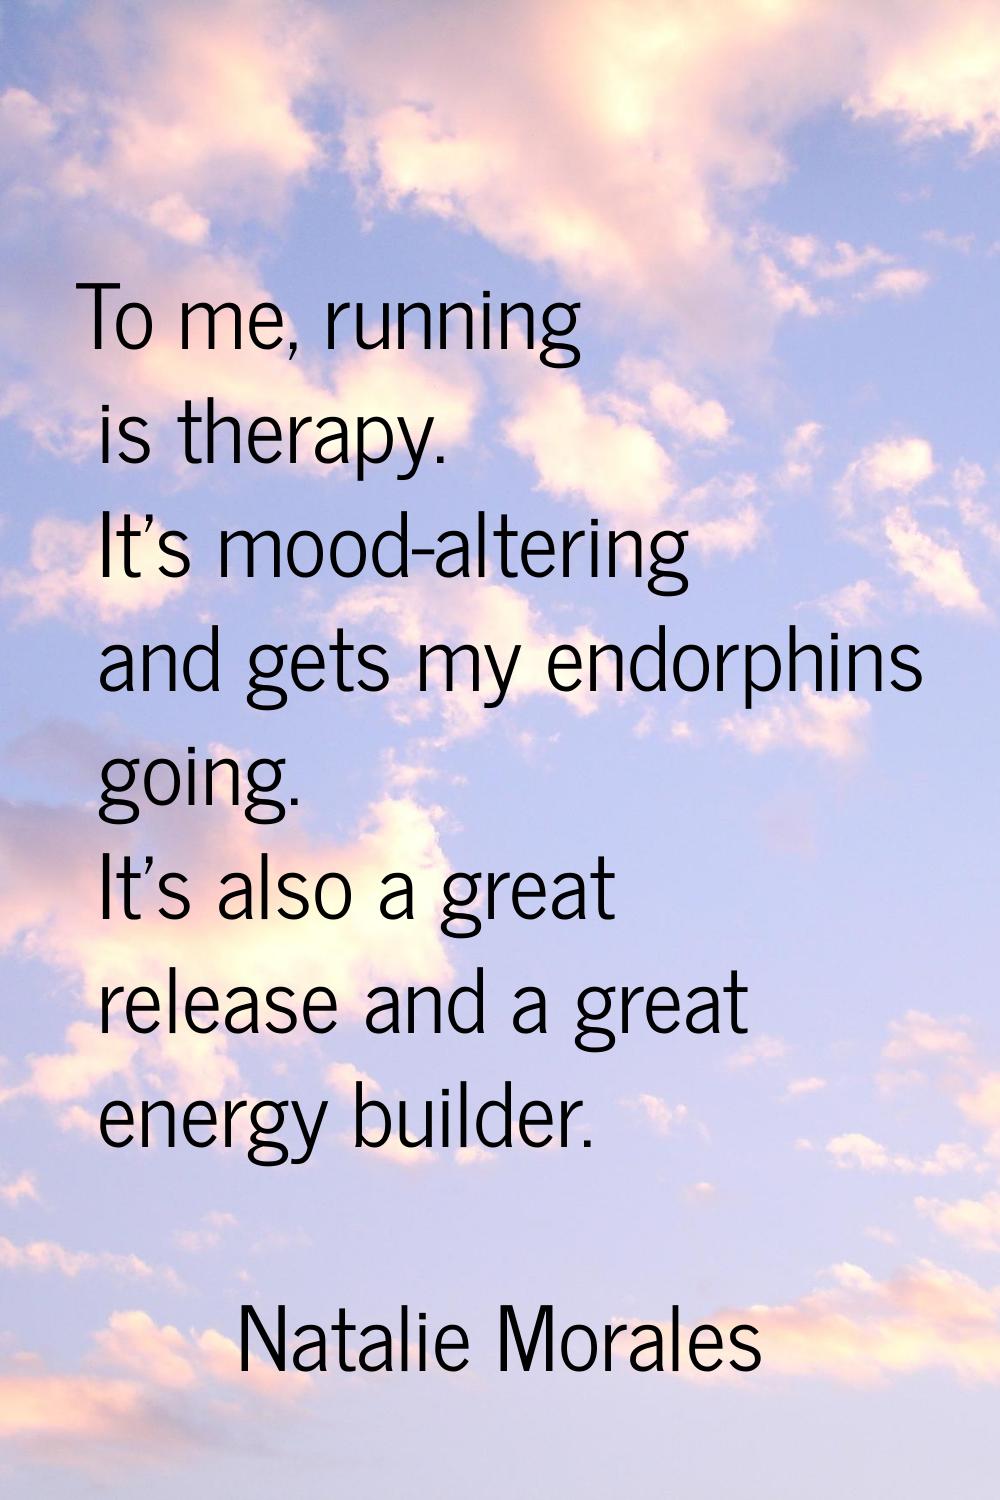 To me, running is therapy. It's mood-altering and gets my endorphins going. It's also a great relea